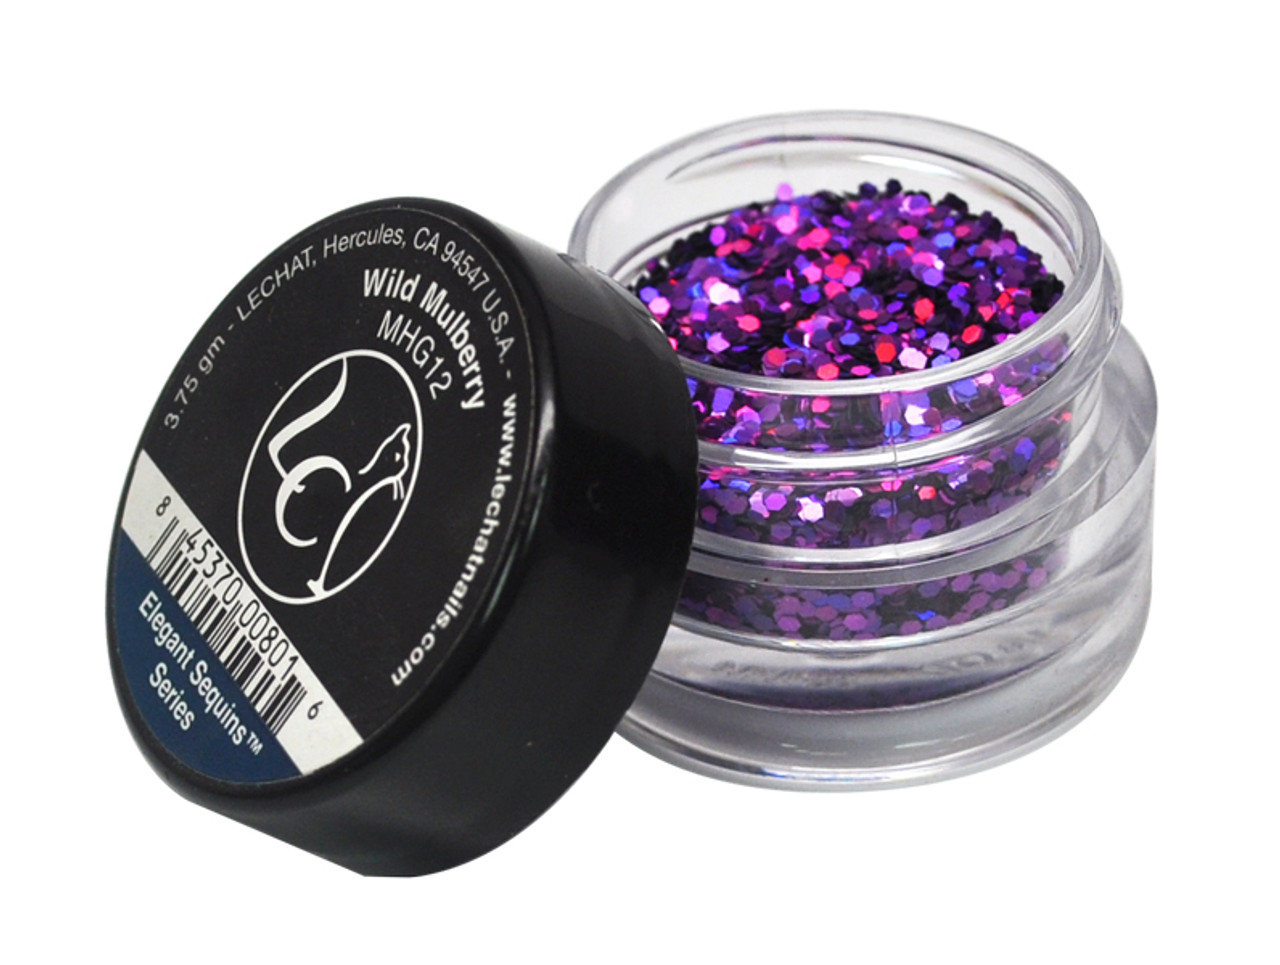 LeChat LuminEscence Hologram Glitter Color: Wild Mulberry (MHG12)